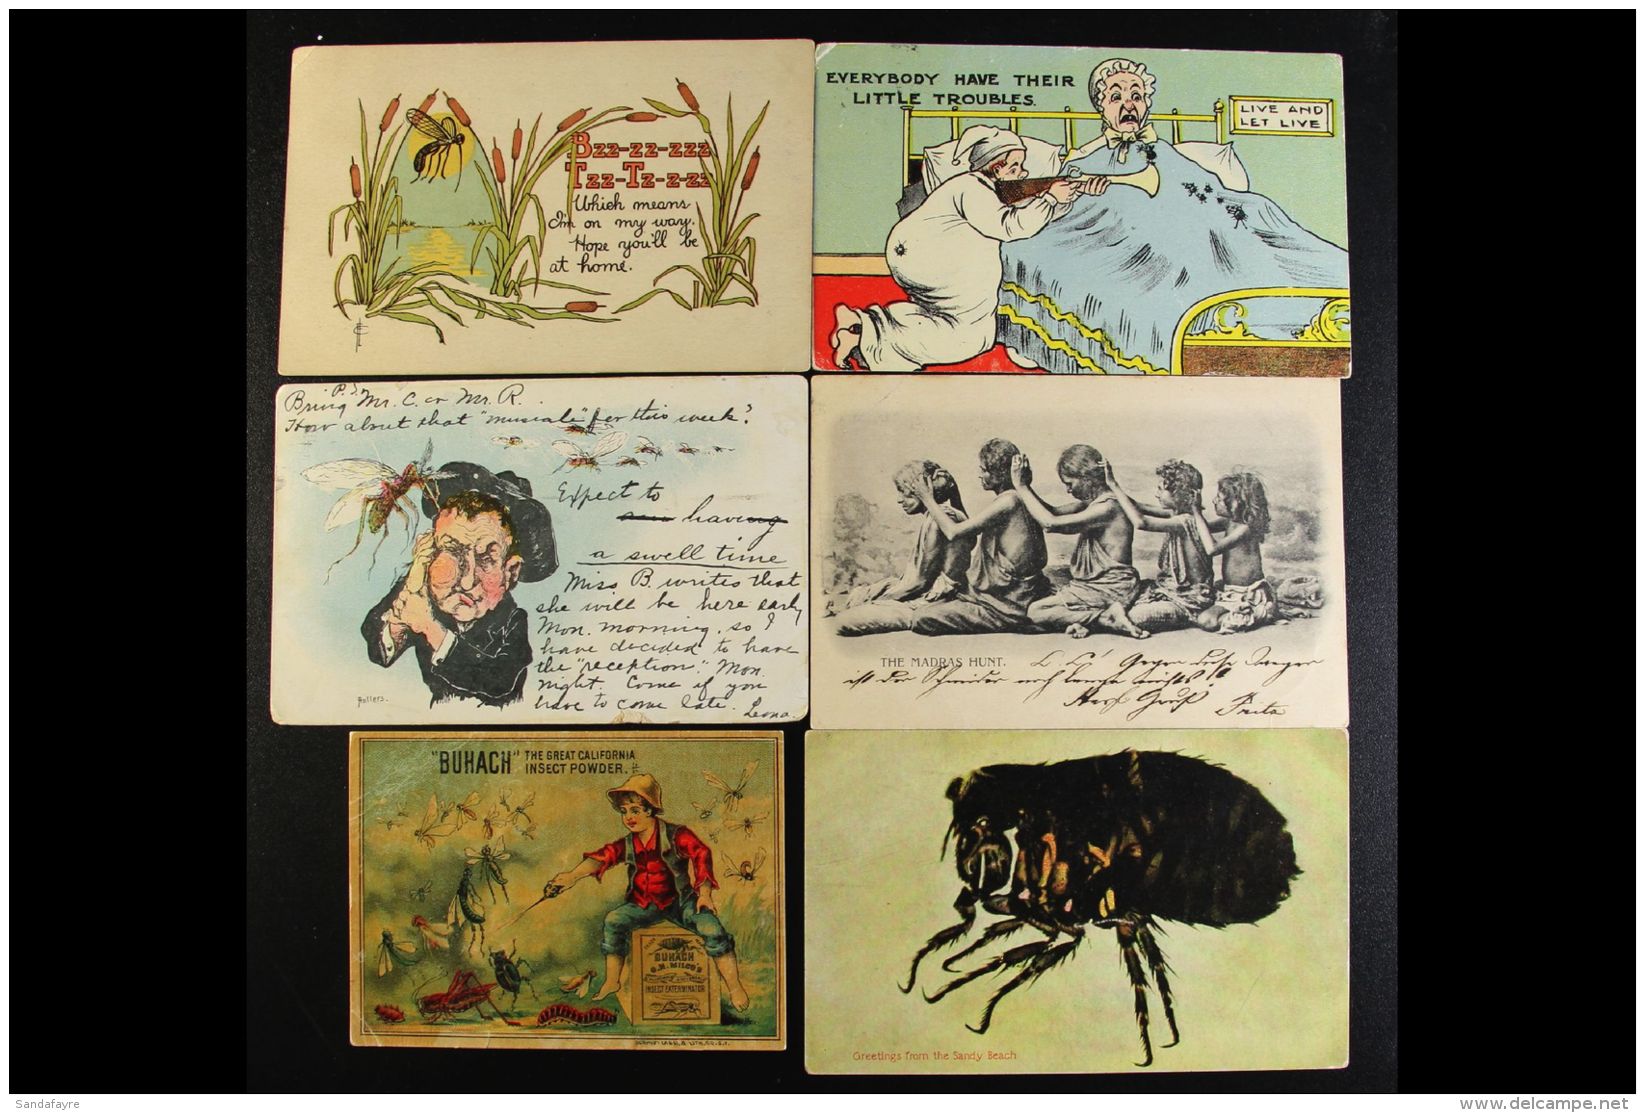 INSECTS An All Periods Worldwide Thematic Collection Of Postcards And Postal Stationery Ranging From Early 1900's... - Non Classés